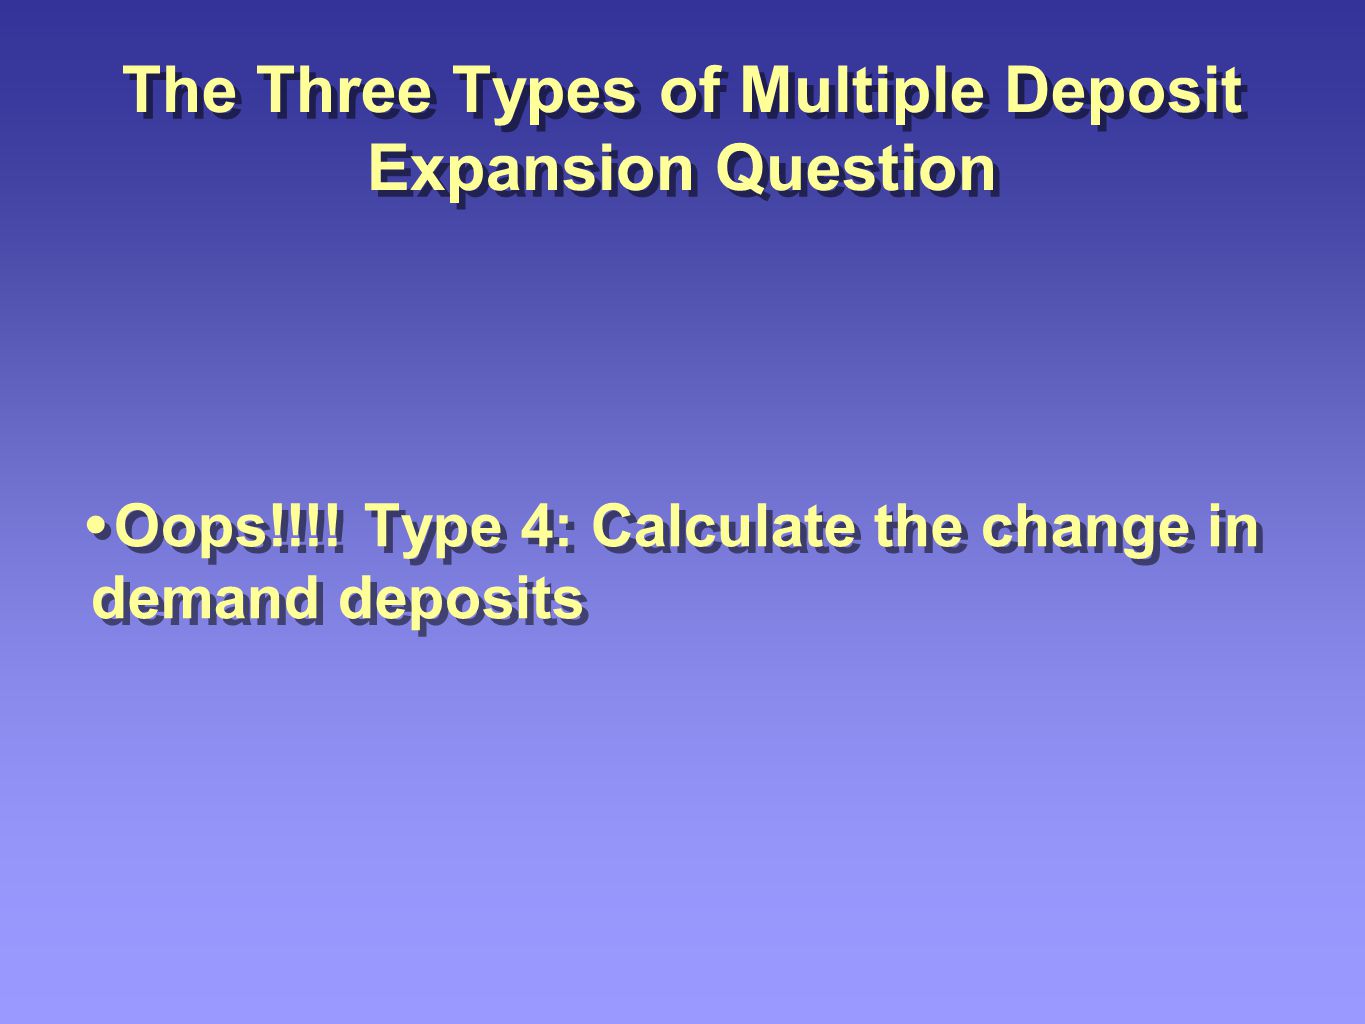 The Three Types of Multiple Deposit Expansion Question